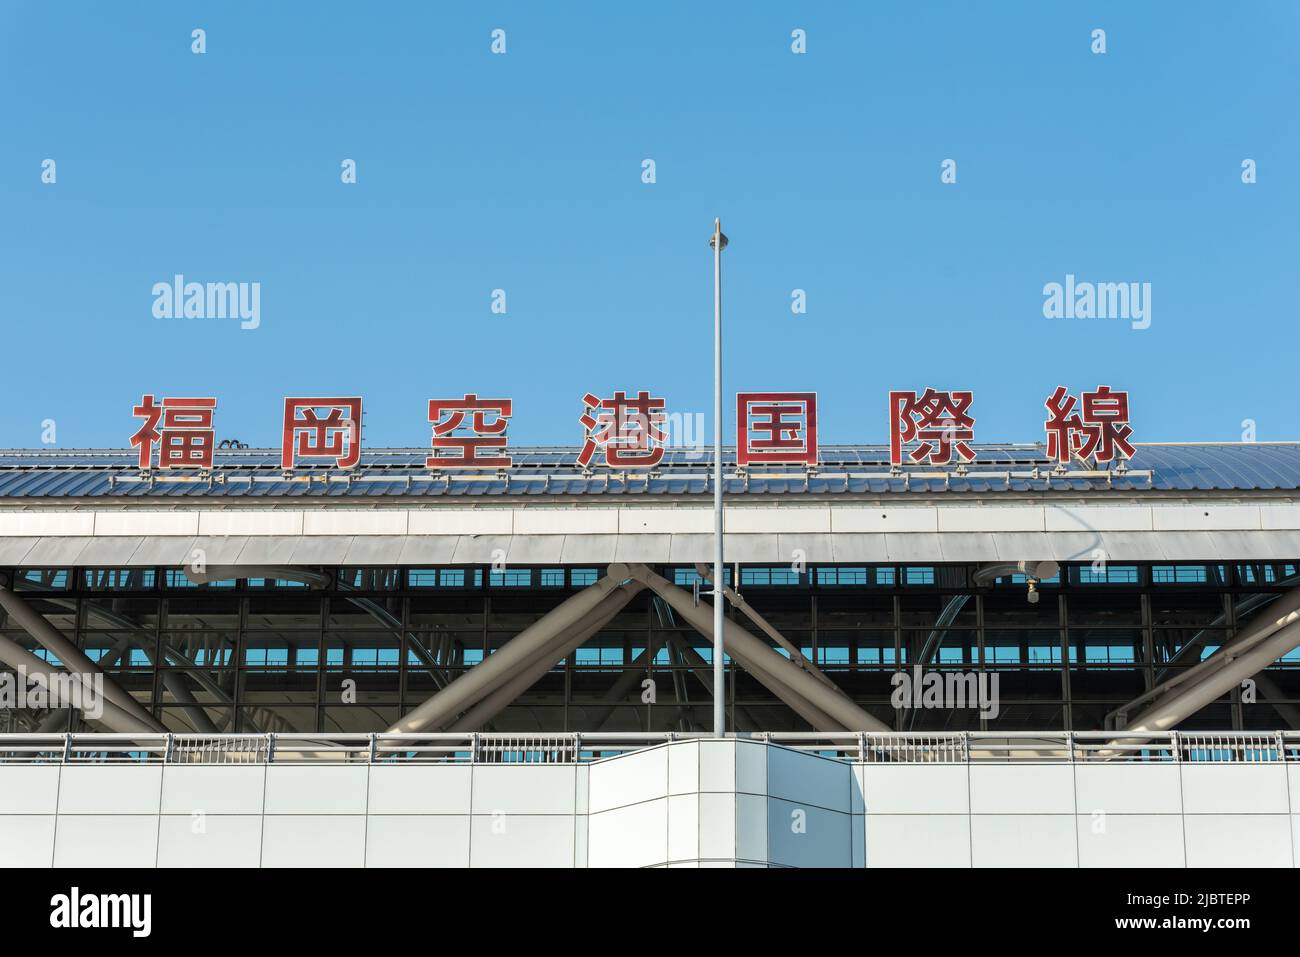 Fukuoka International Airport name on the roof of the airport building Stock Photo